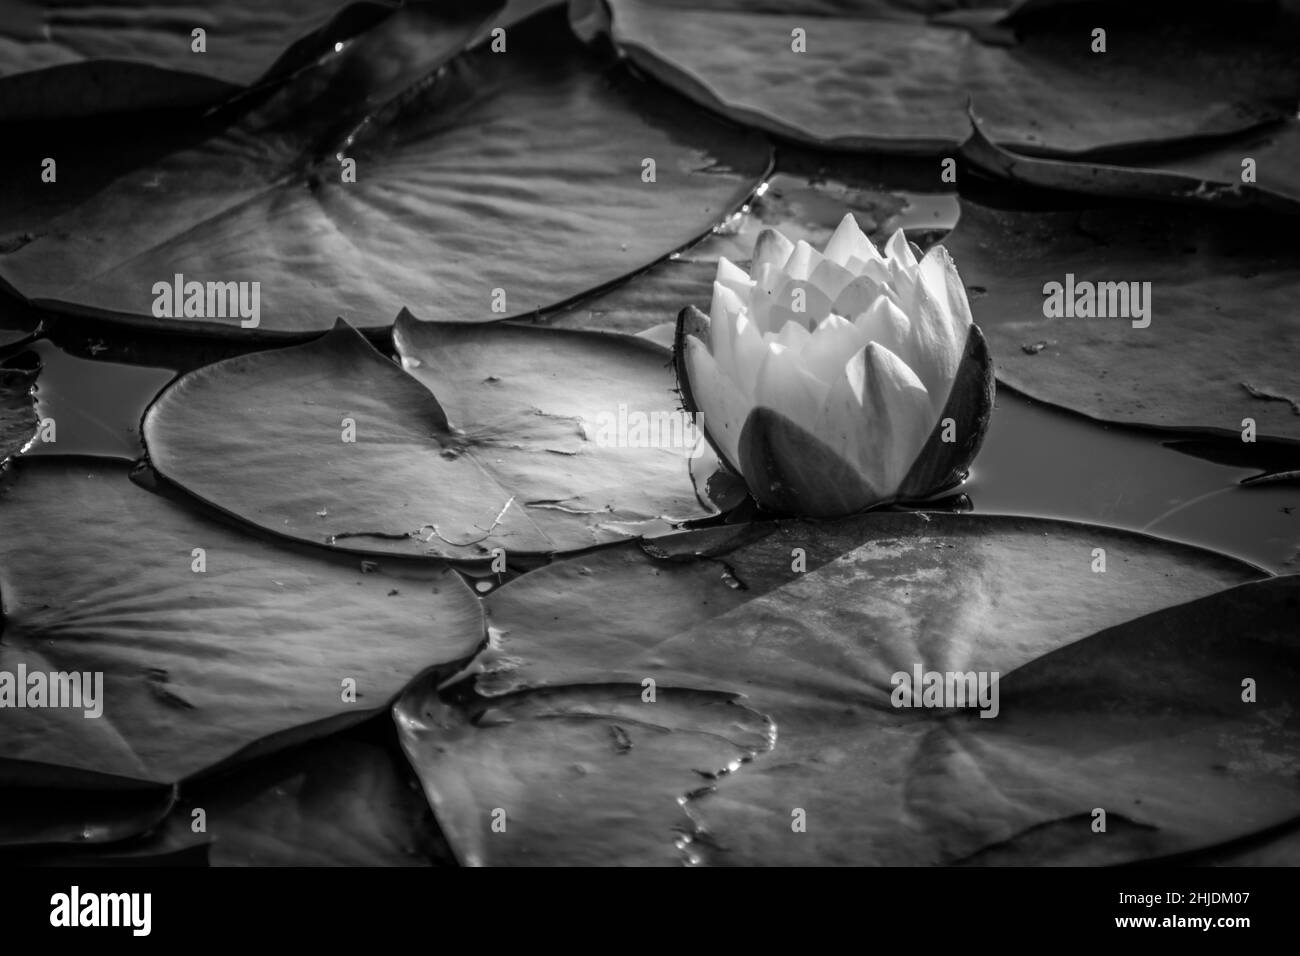 Grayscale close-up shot of a white water lily flower and leaves floating on water Stock Photo